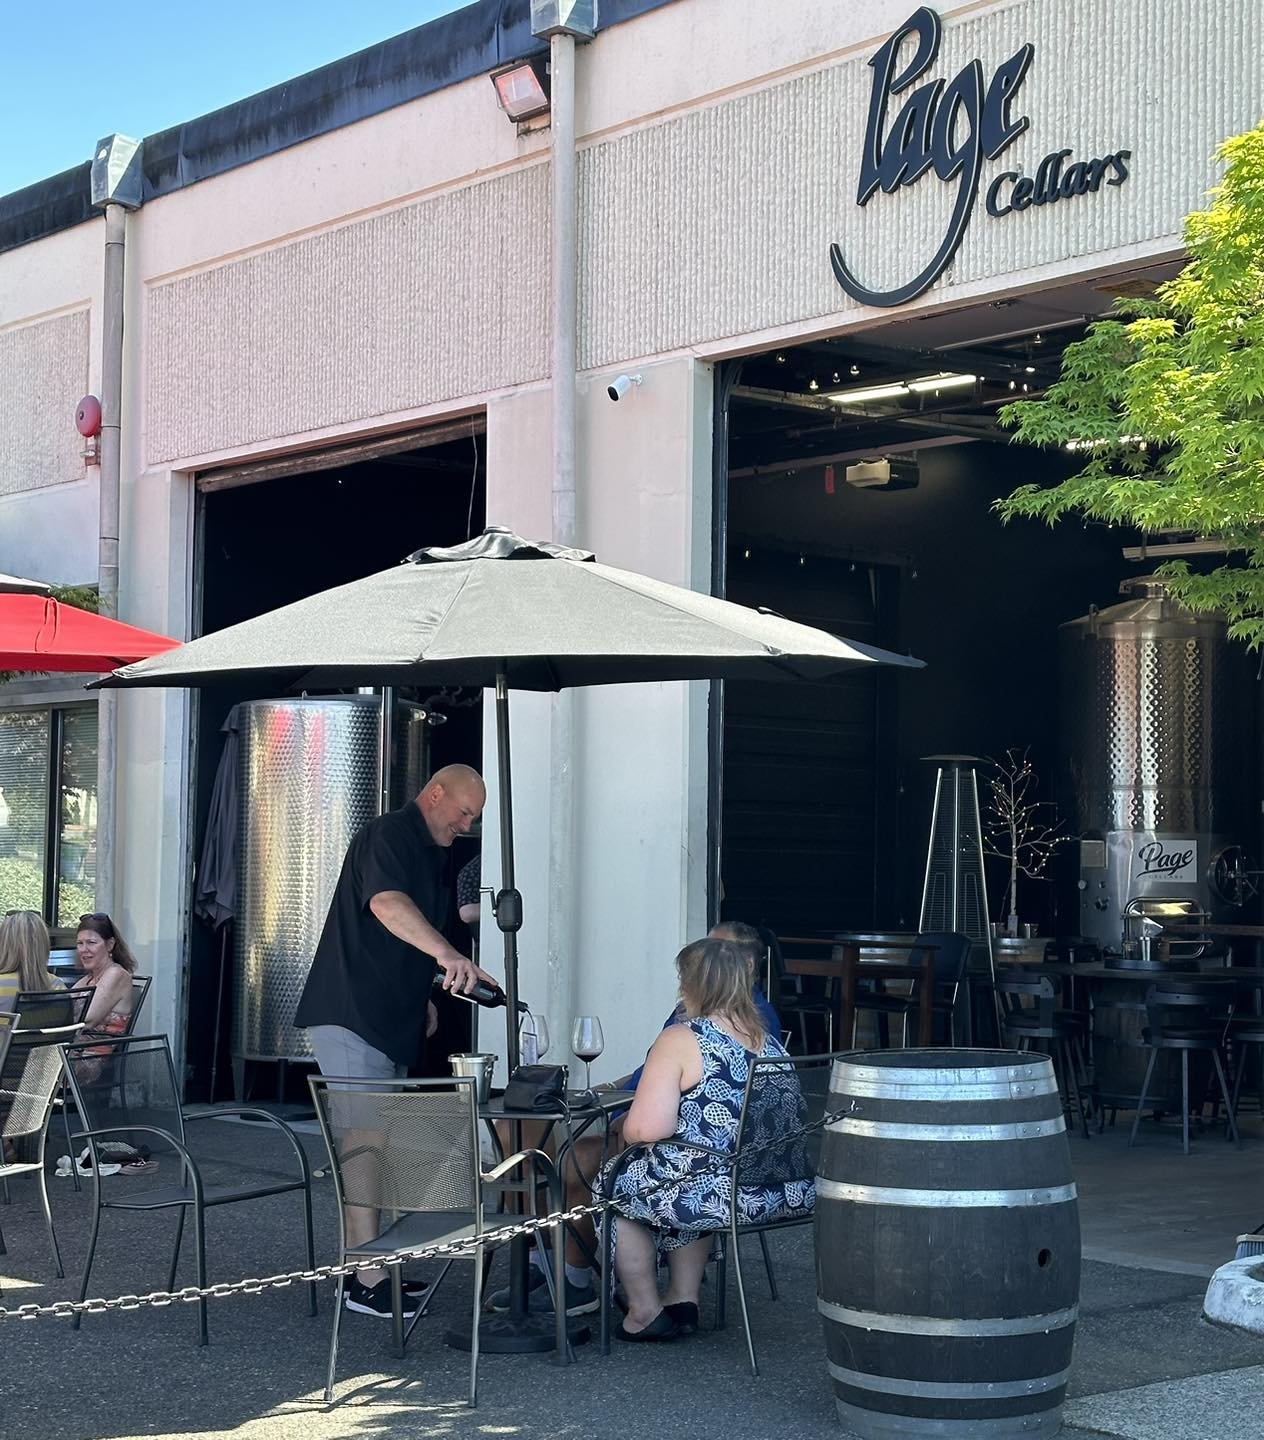 Winemaker at work&hellip; always a great Saturday when Todd Krivoshein is pouring! We loved seeing so many smiling faces in the sunshine today ☀️🍷 thanks for joining us!